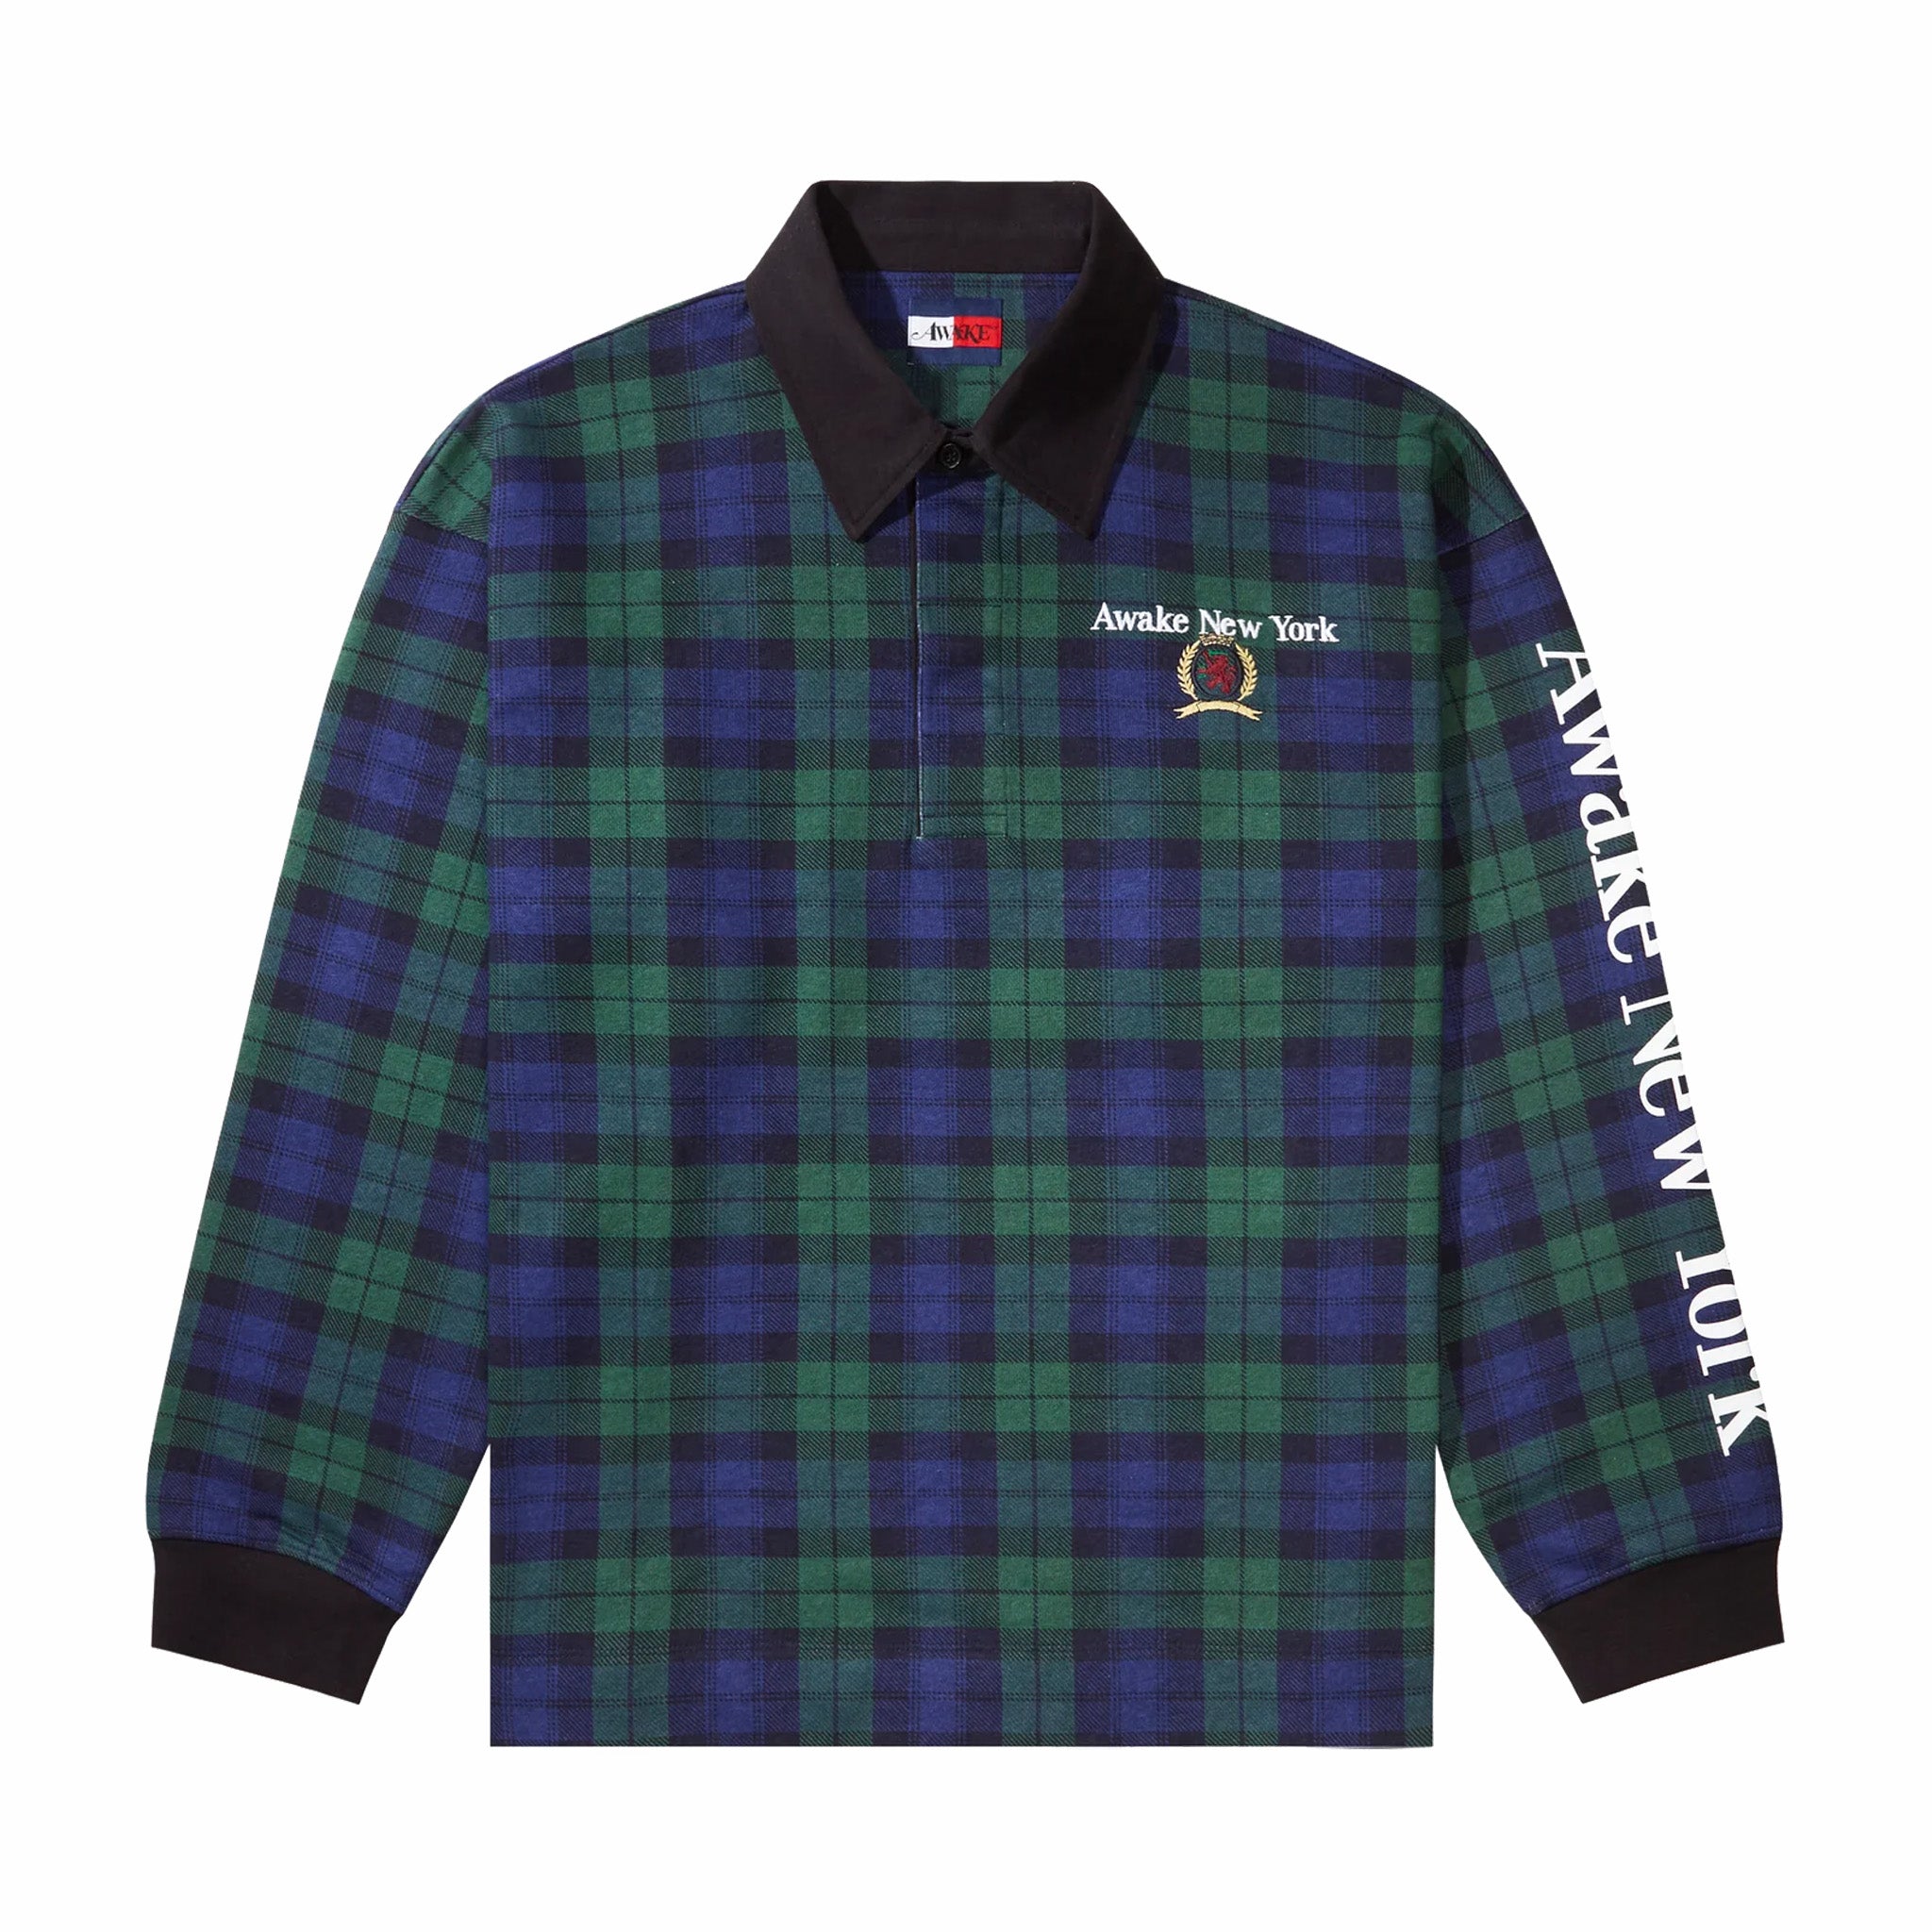 Awake NY x Tommy Hilfiger Rugby Shirt (Green) - August Shop